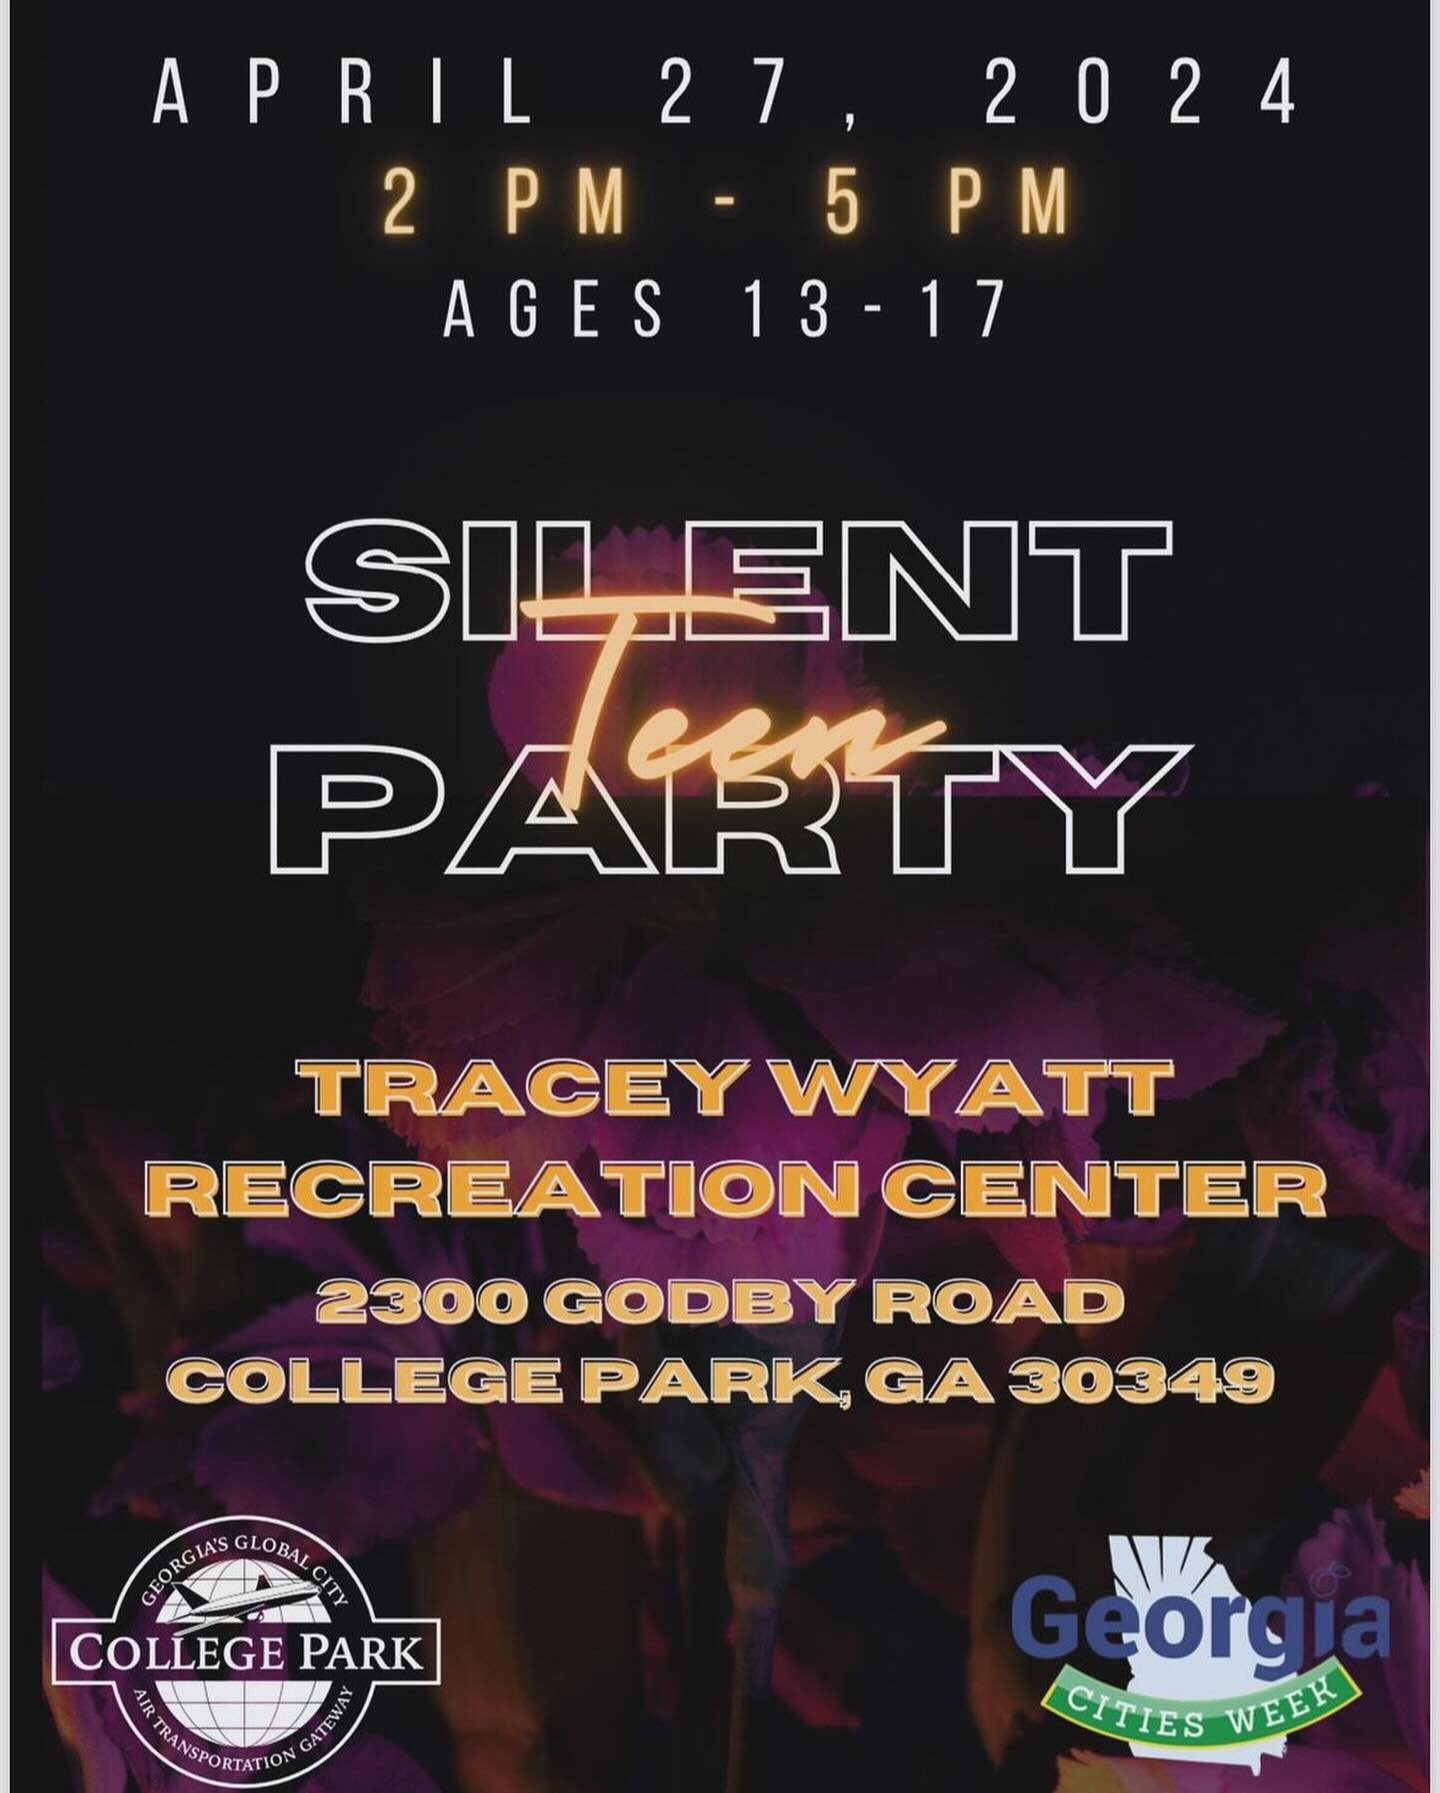 Some photos from the silent party at Tracey Wyatt Recreation Center. #silentparty (&lt;&mdash; swipe left)